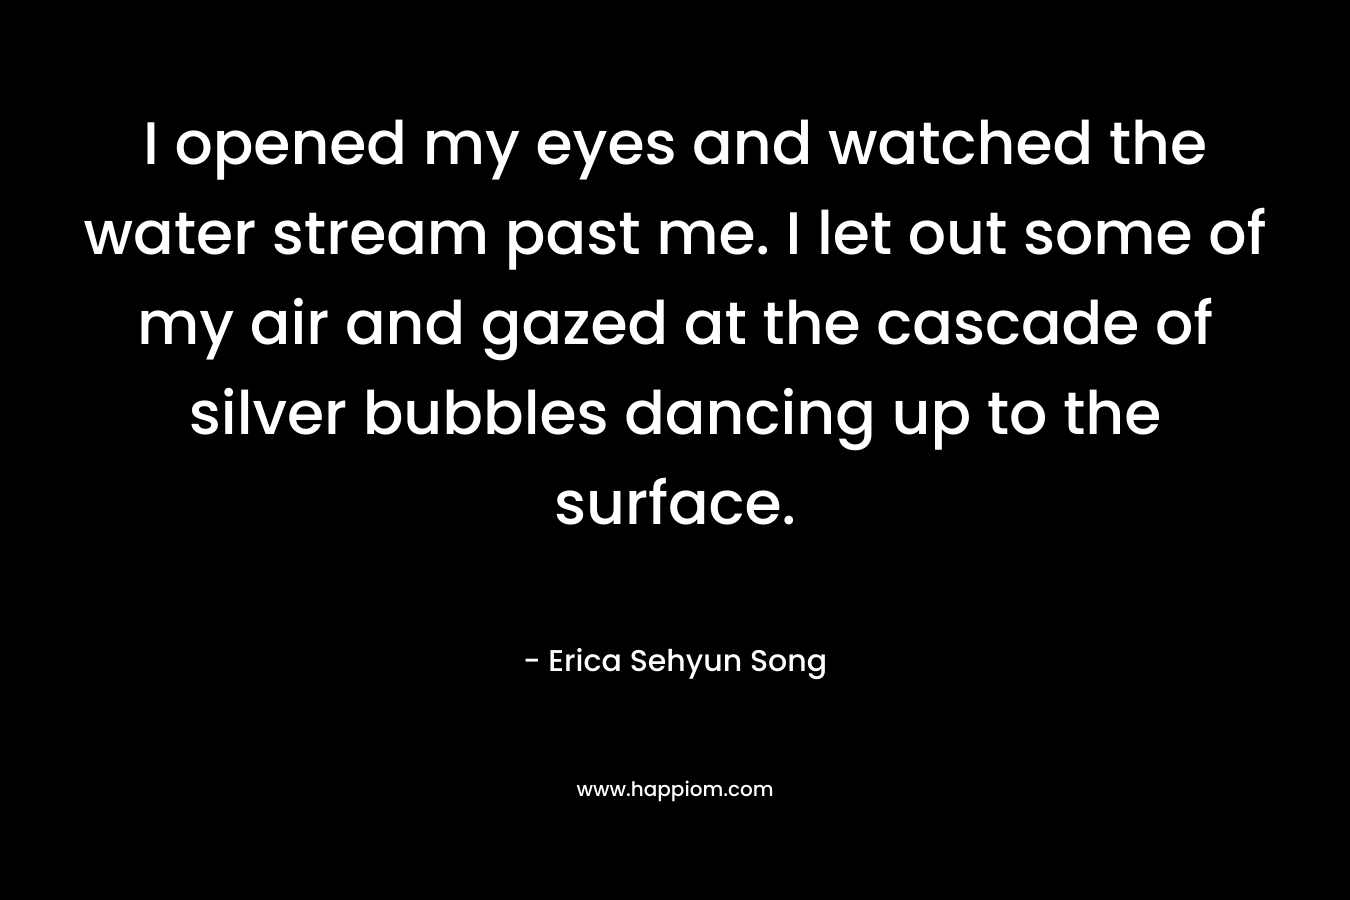 I opened my eyes and watched the water stream past me. I let out some of my air and gazed at the cascade of silver bubbles dancing up to the surface. – Erica Sehyun Song